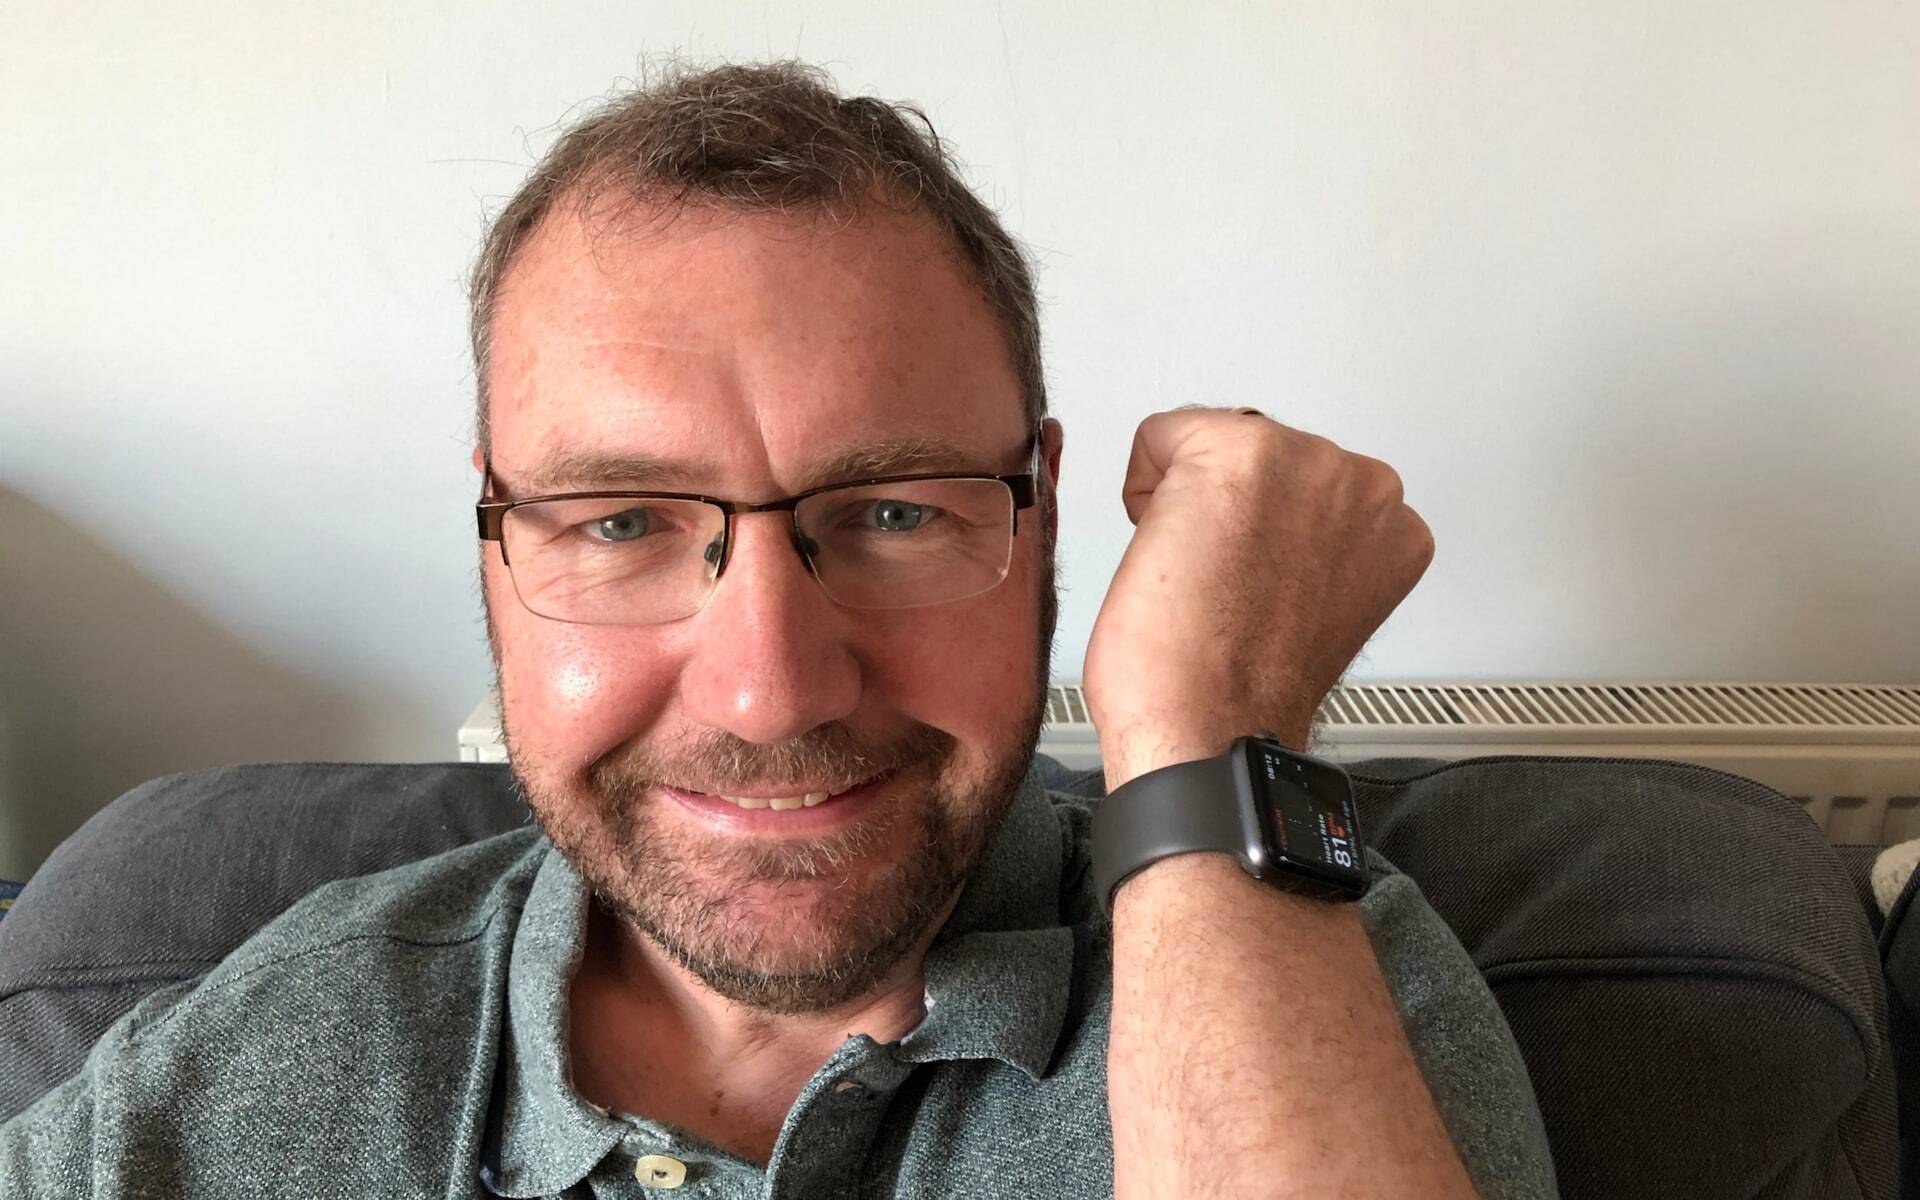 Paul Hutton and the Apple Watch that saved his life - Unusual reading on the Apple Watch saves a man's life